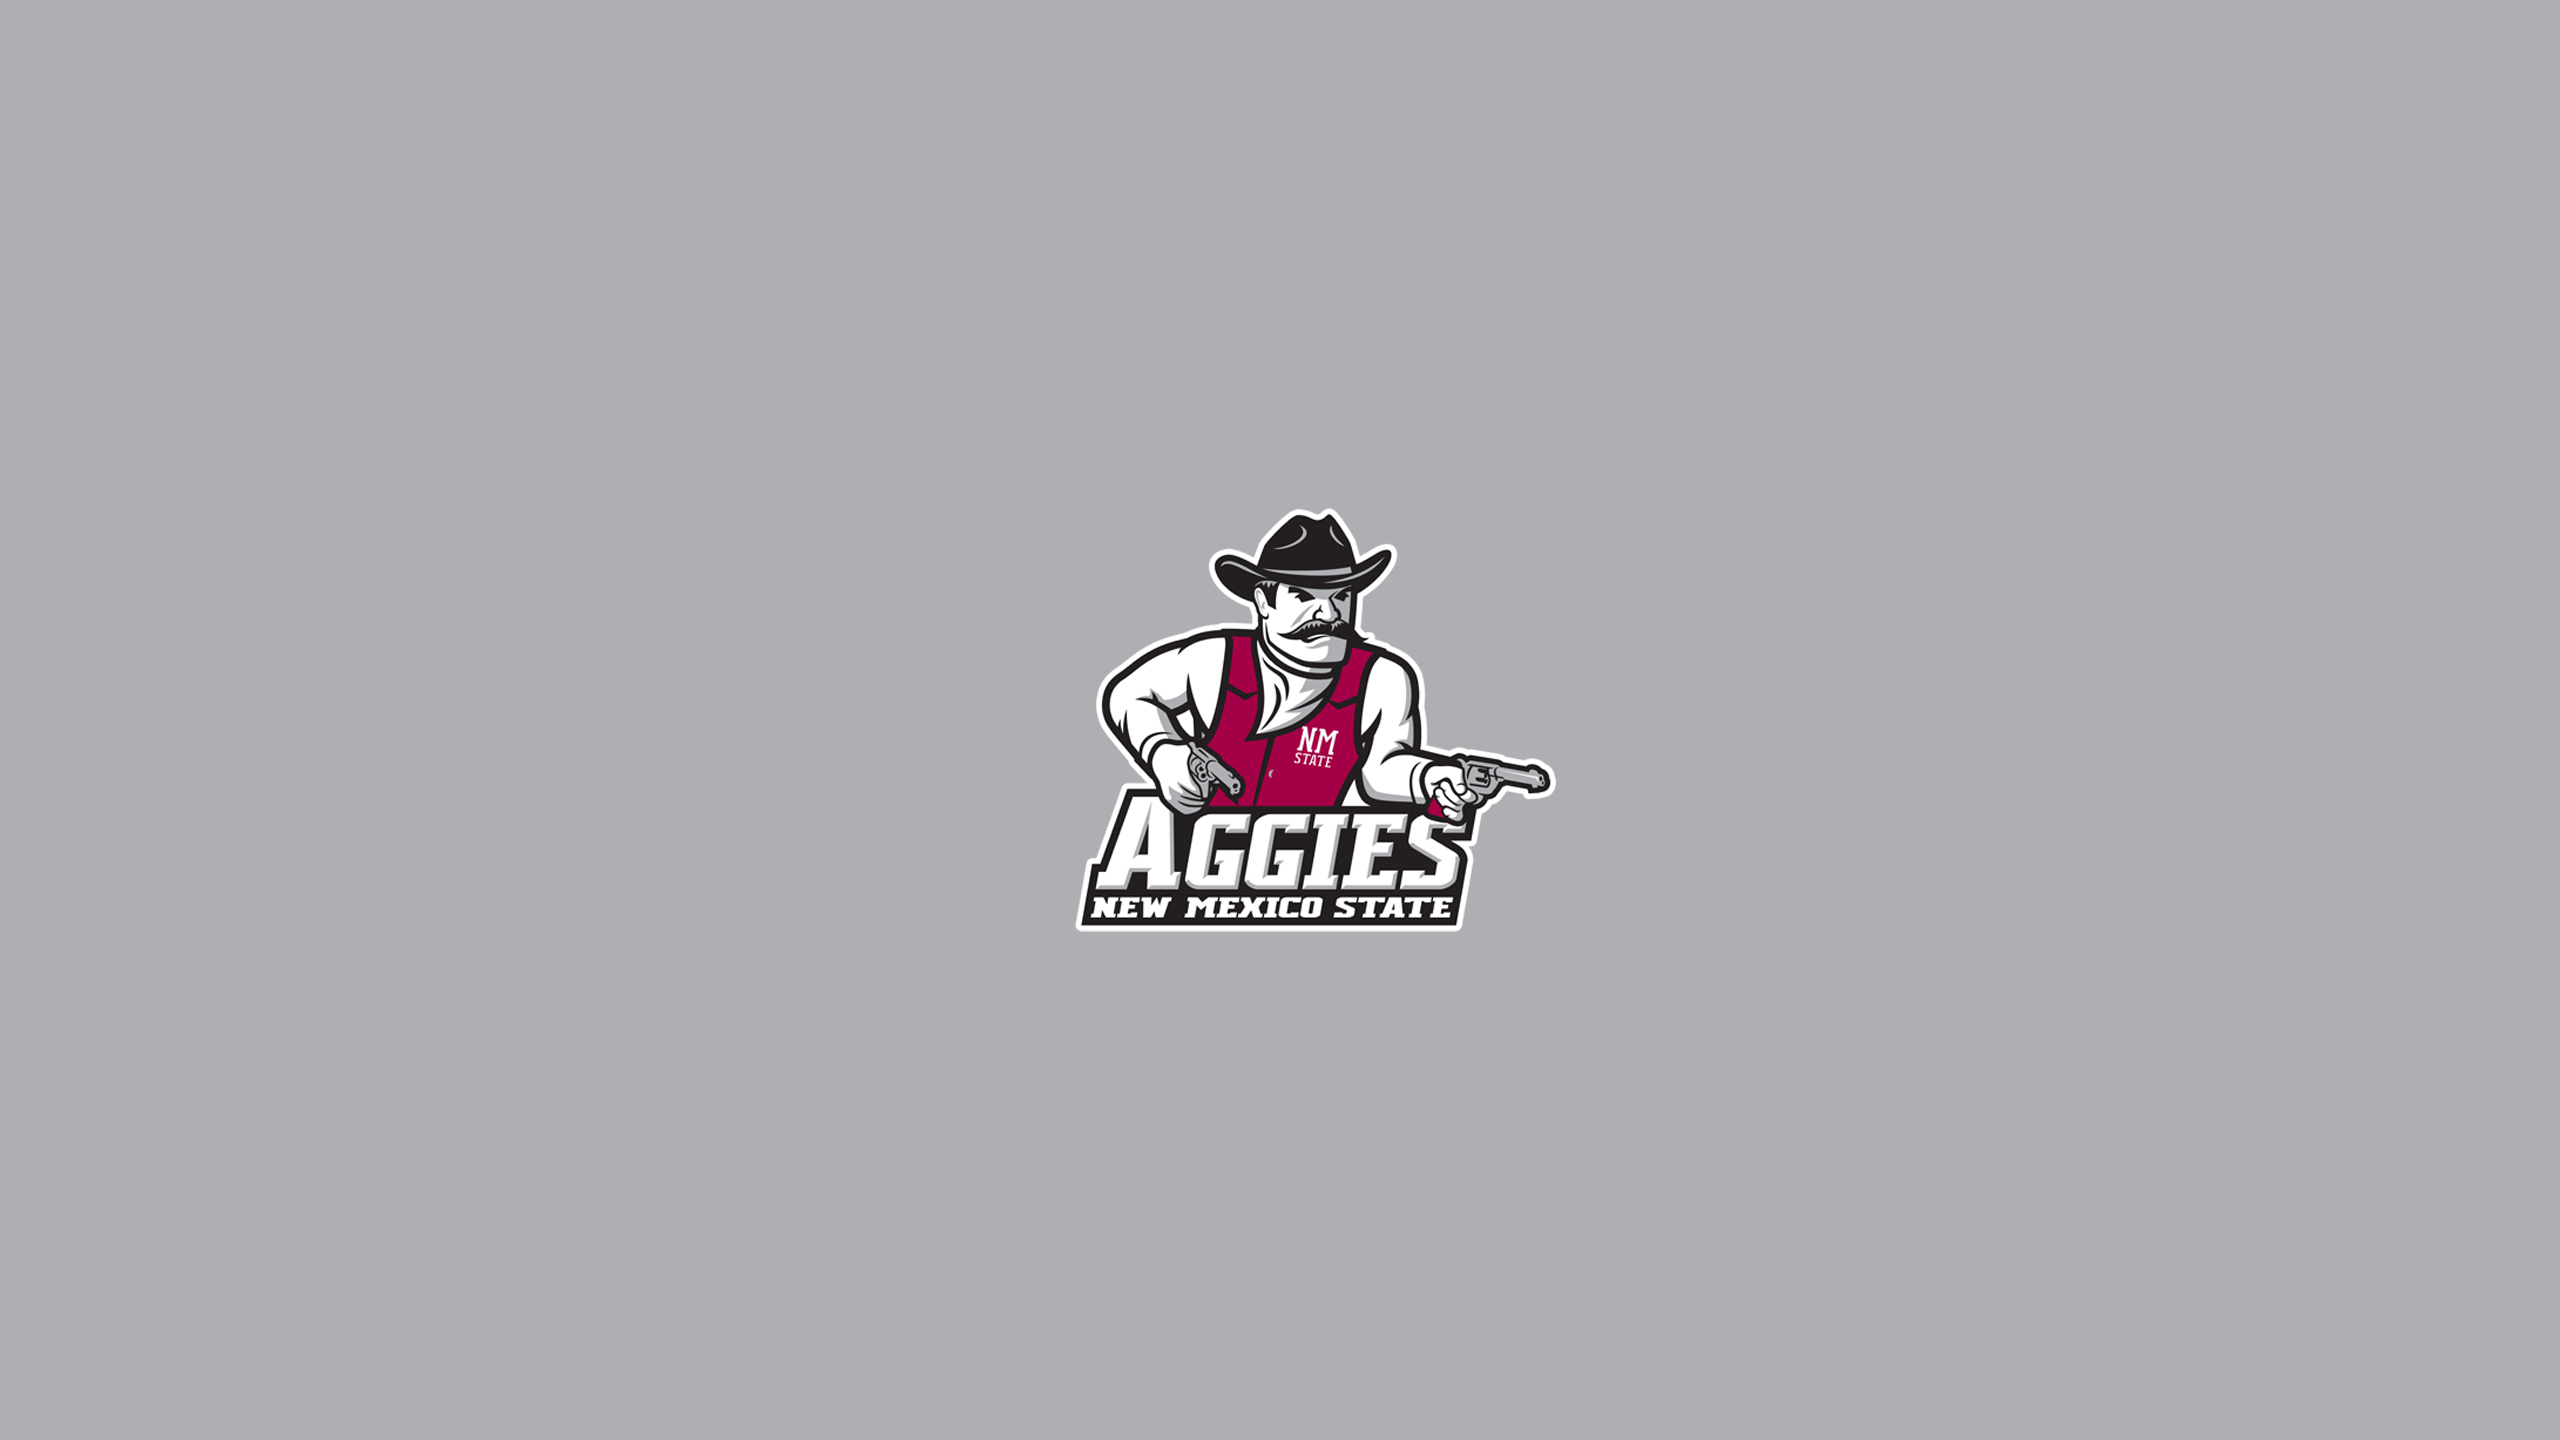 New Mexico State Aggies Basketball - NCAAB - Square Bettor